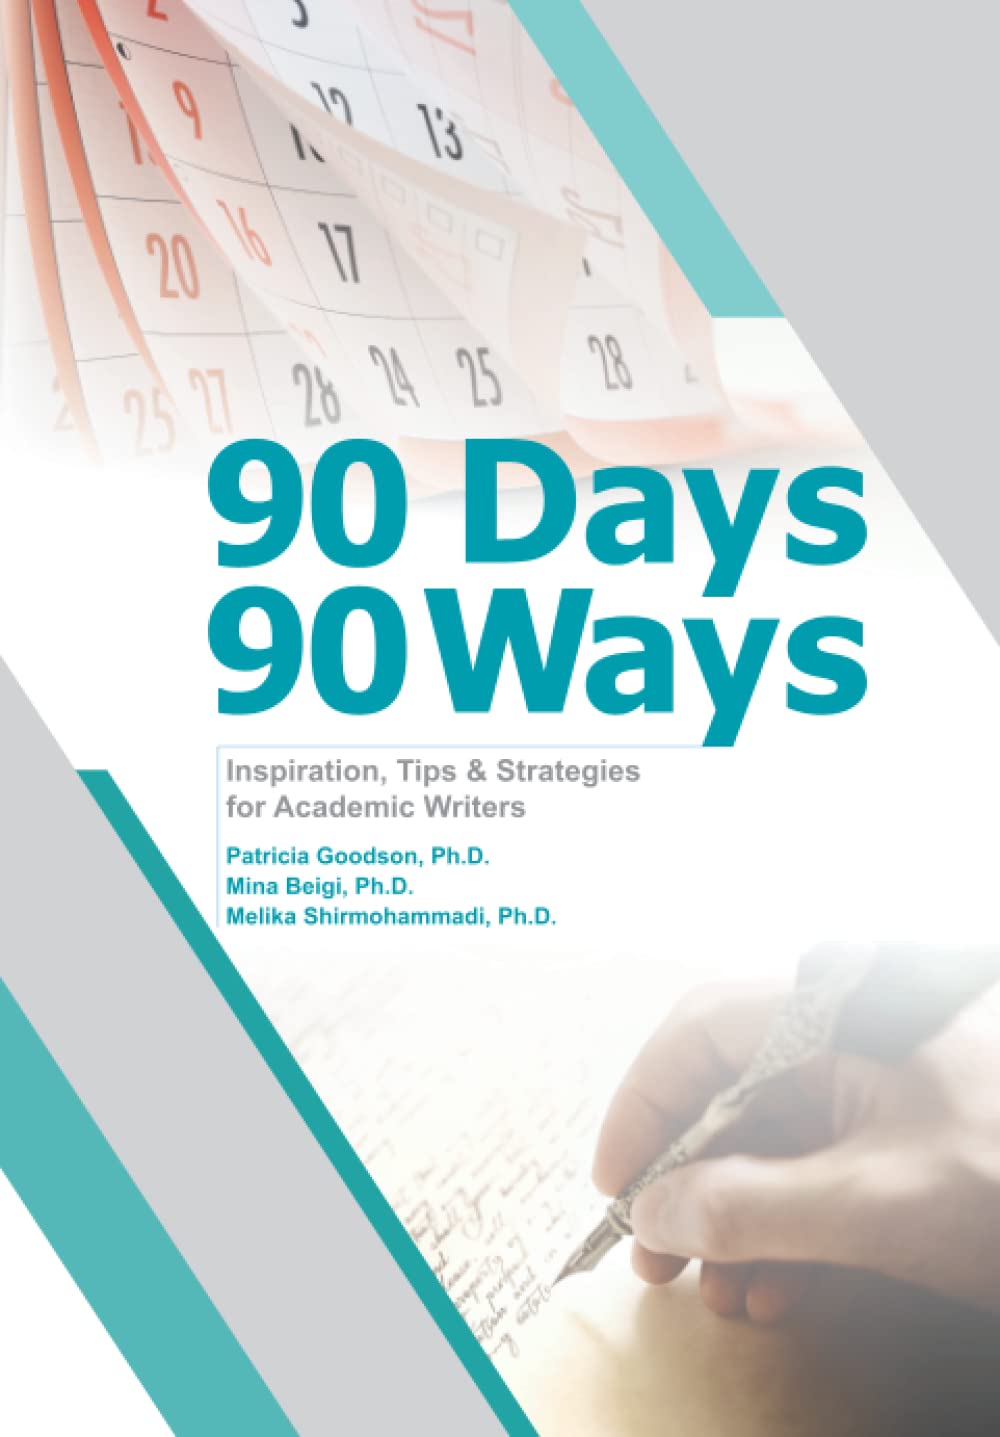 90 Days, 90 Ways: Inspiration, Tips & Strategies for Academic Writers